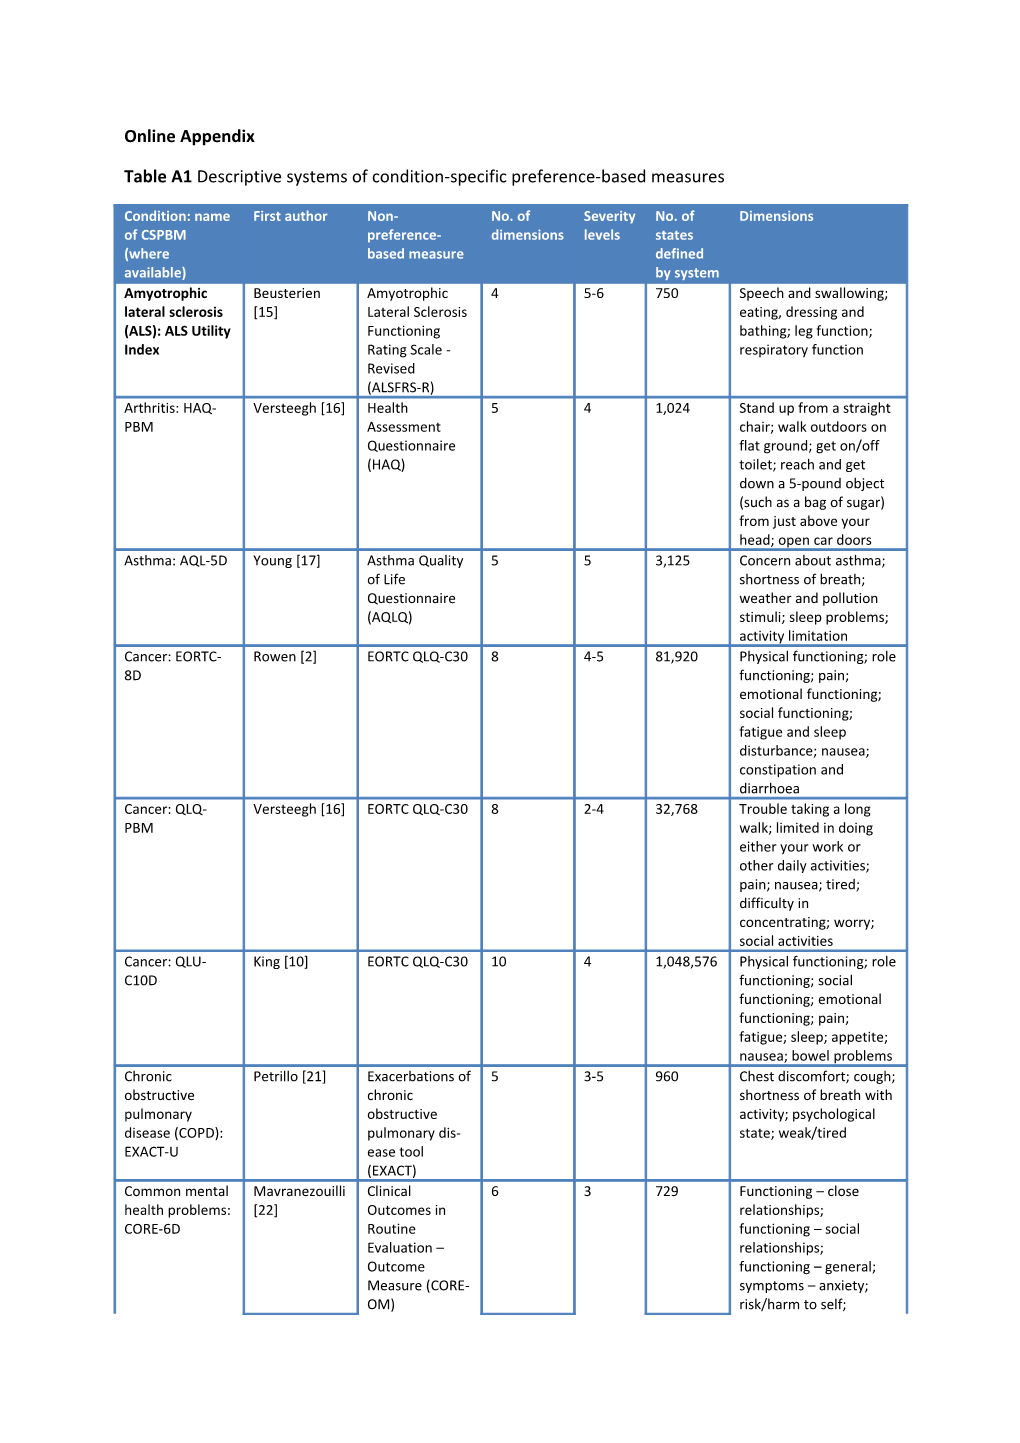 Table A1 Descriptive Systems of Condition-Specific Preference-Based Measures